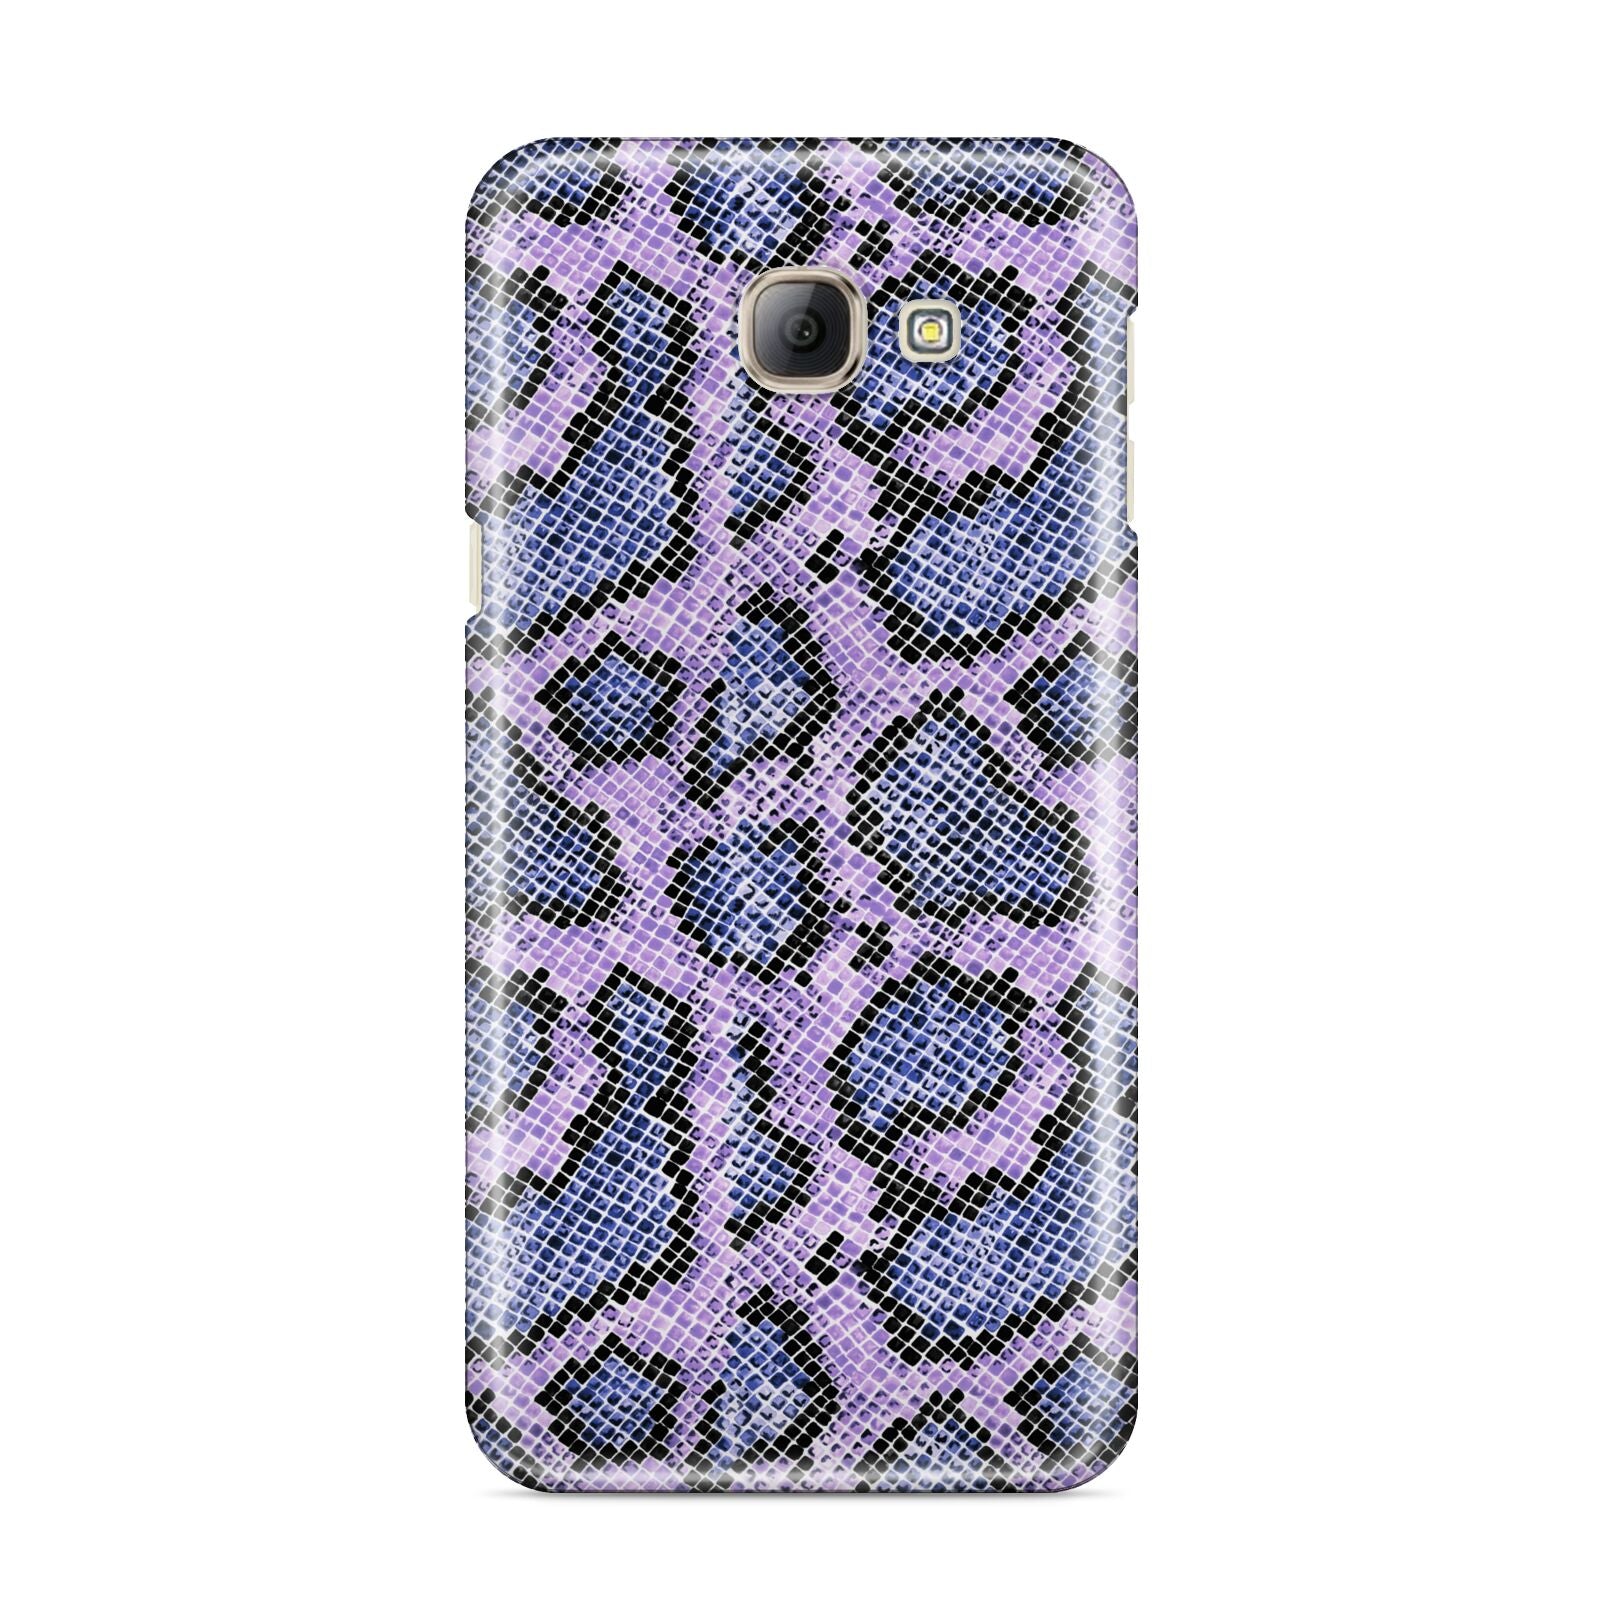 Purple And Blue Snakeskin Samsung Galaxy A8 2016 Case